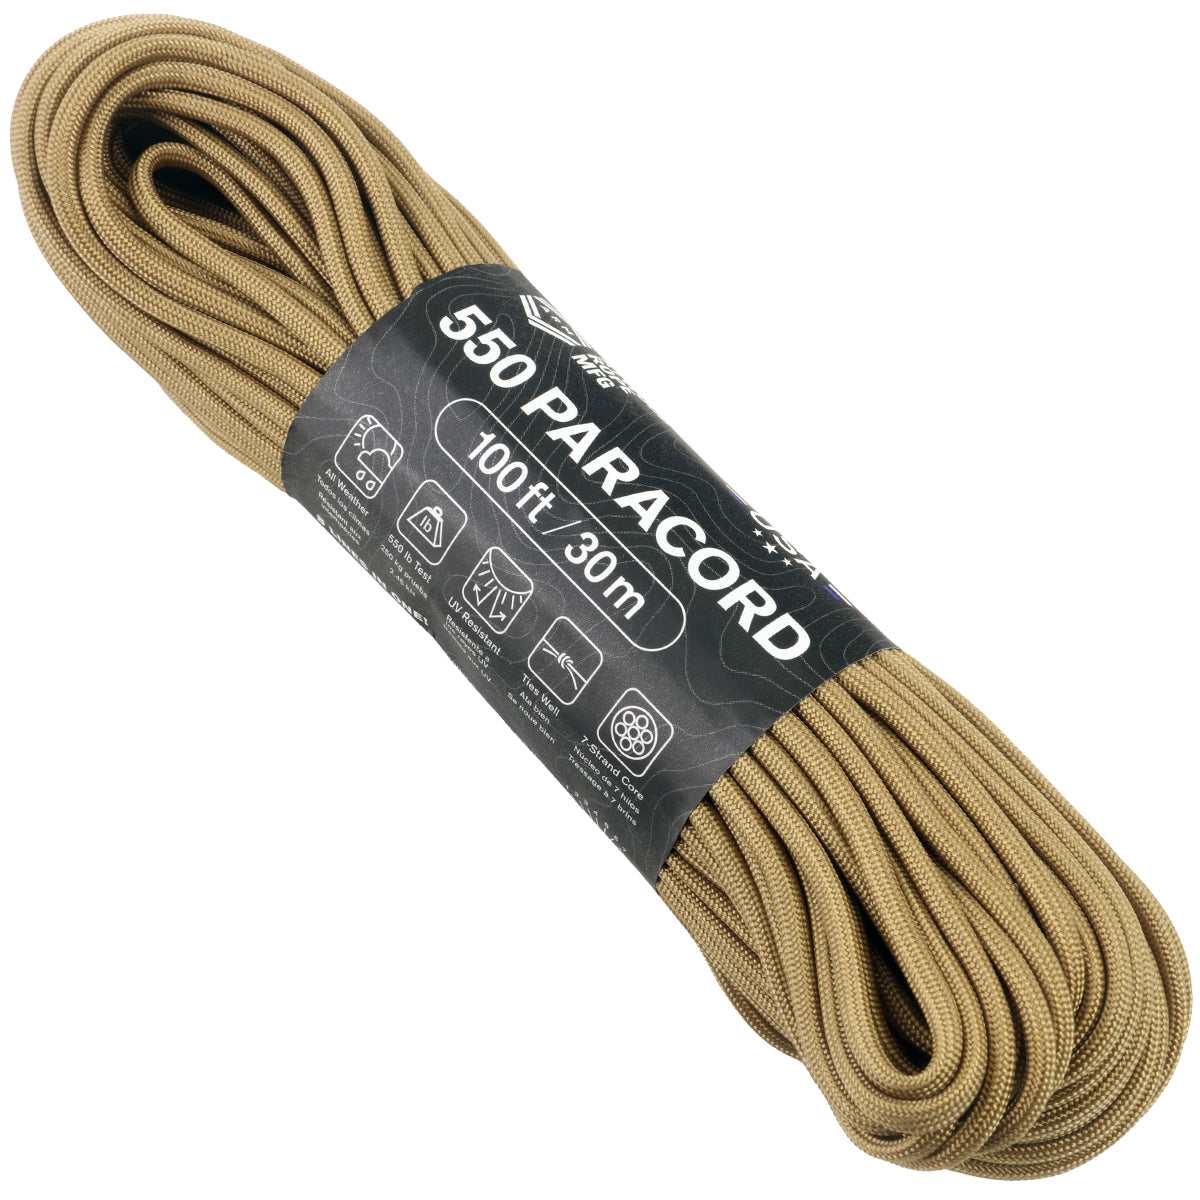  95 Cord - Coyote Brown - Type 1 Cord - 100 Feet on